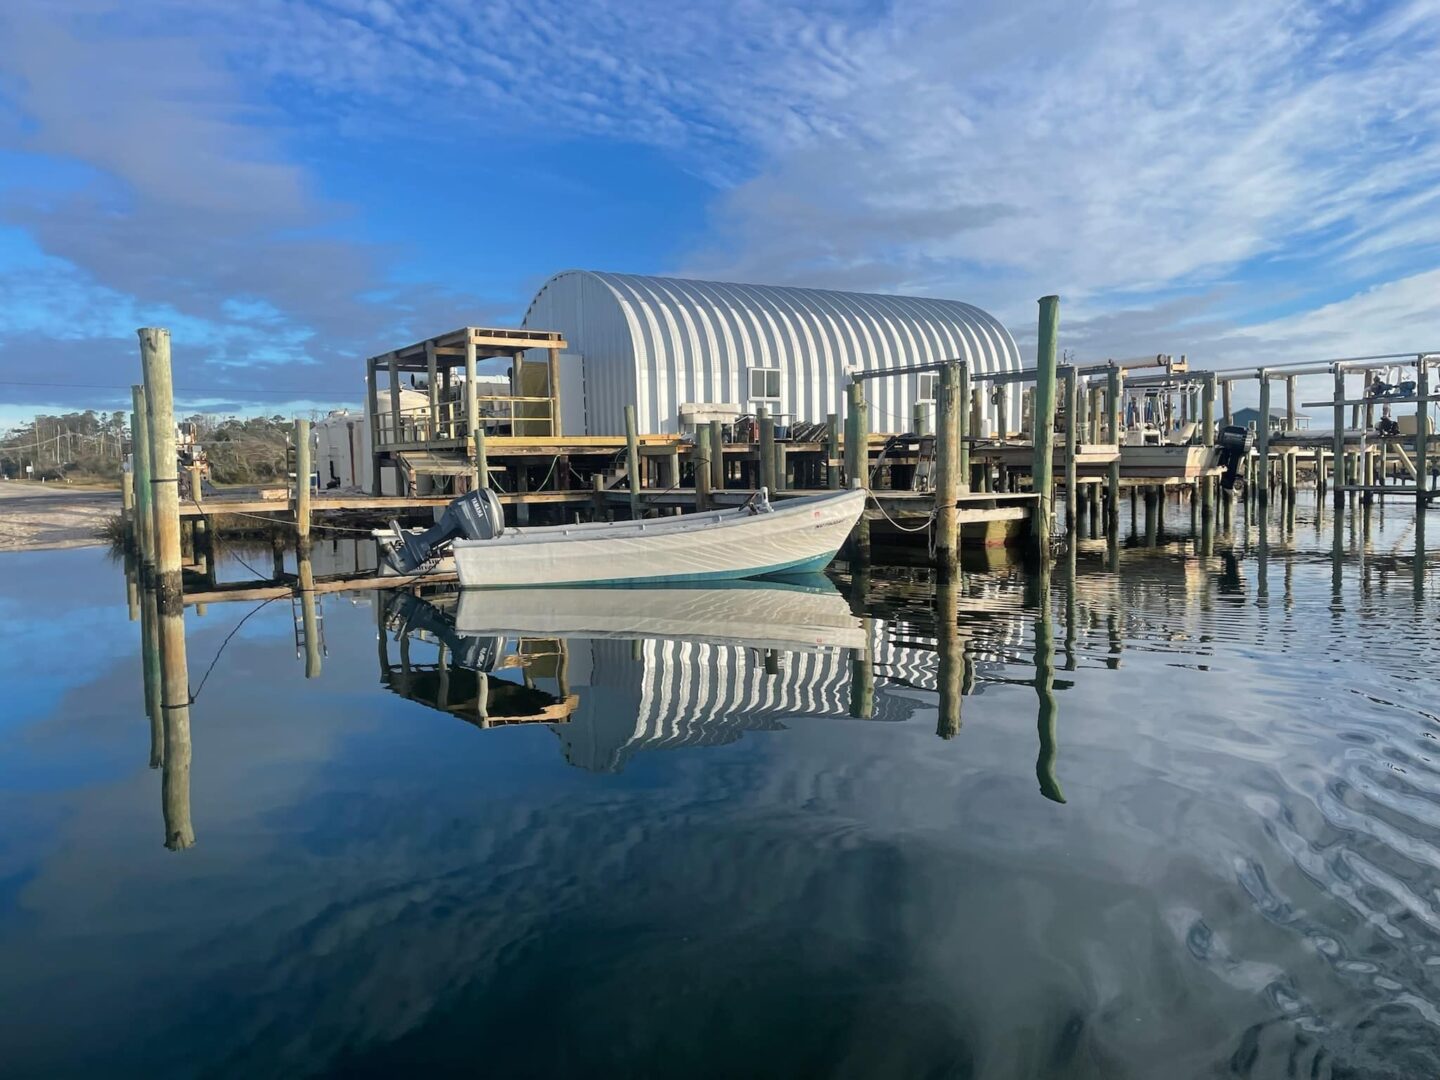 Quonset hut shellfish hatchery on wooden docks above water, small boat tied to end of the dock